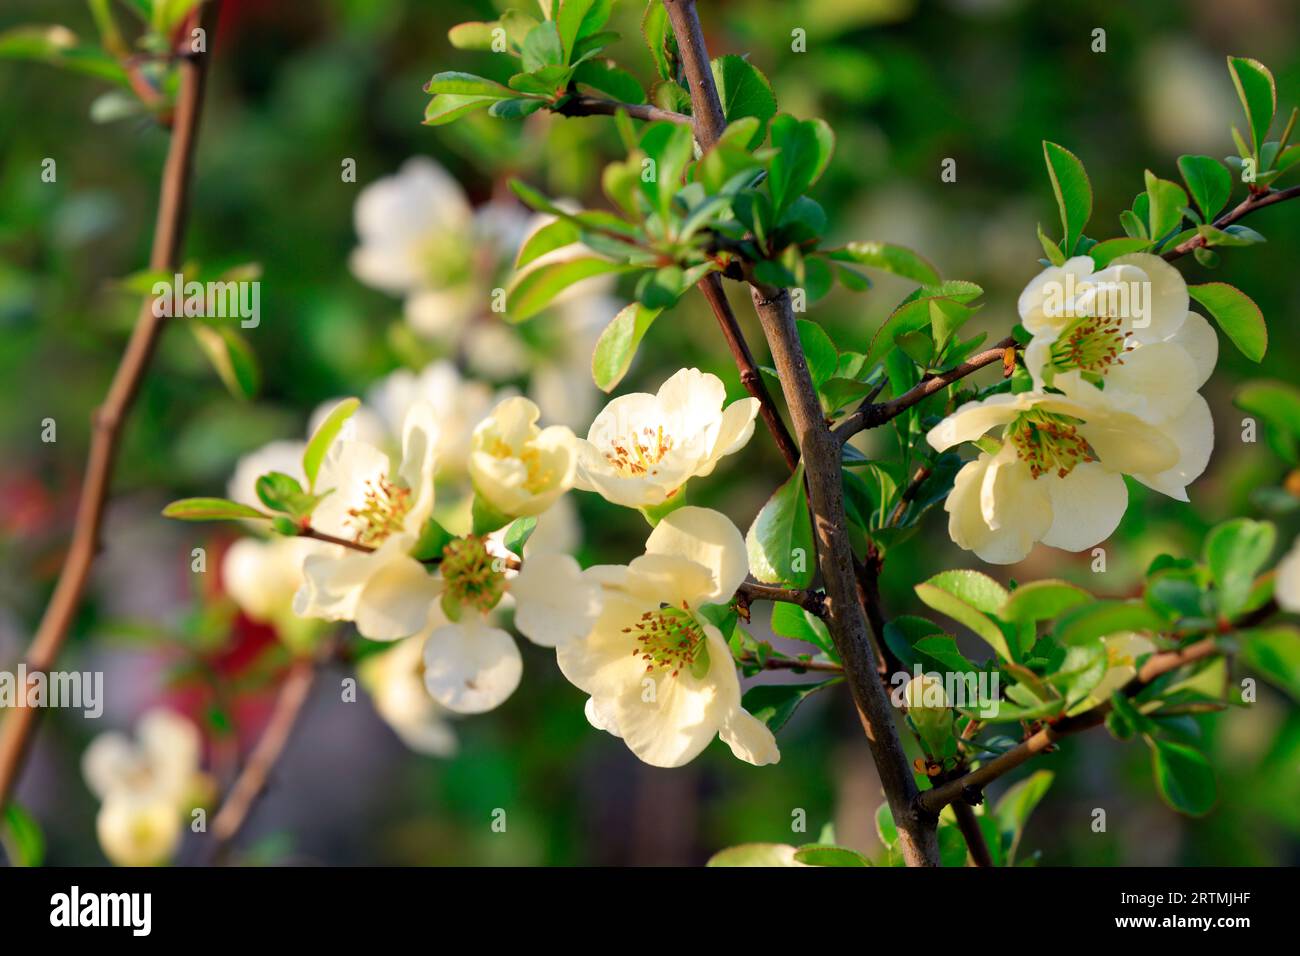 Flowering Begonia flowers bloom in a botanical garden, North China Stock Photo